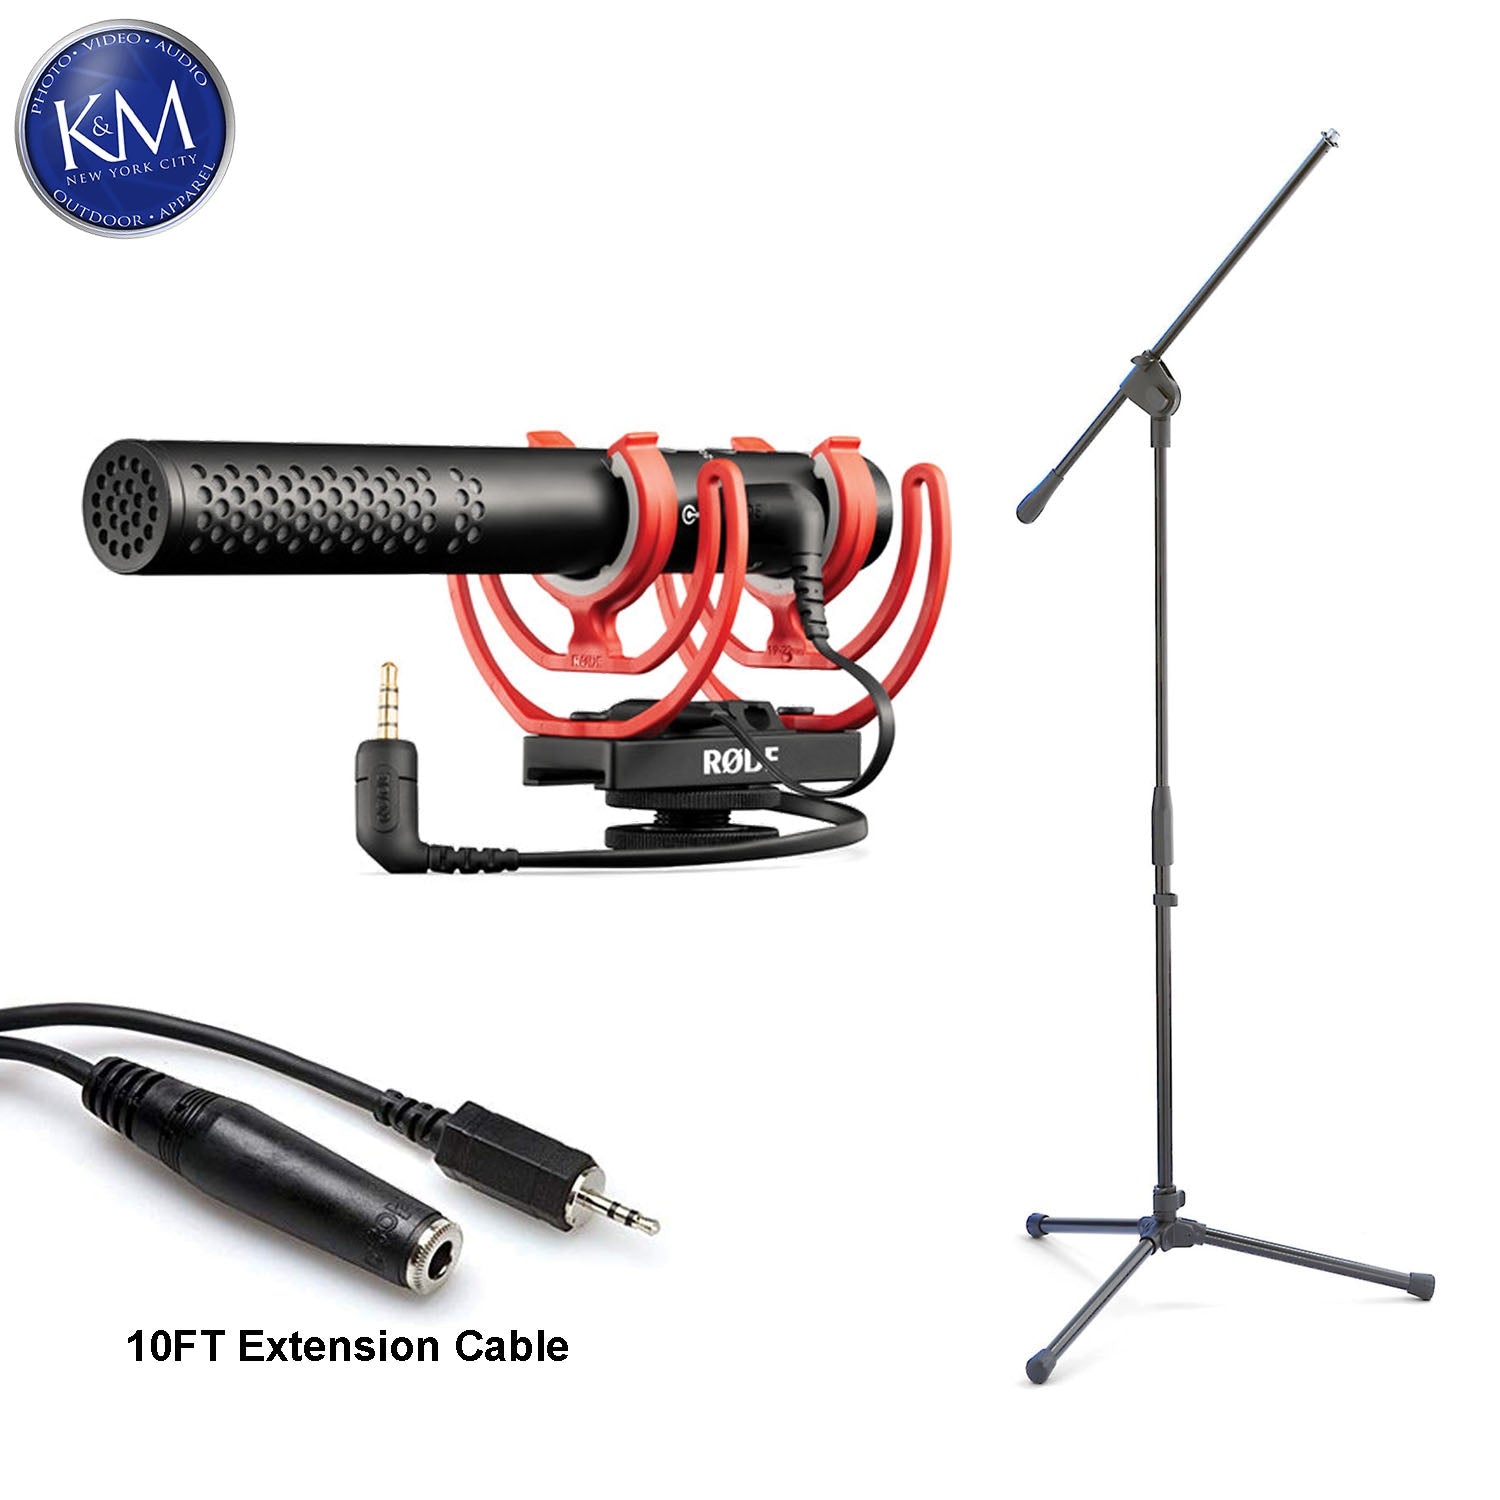 RODE VideoMic Pro+ Camera-Mount Shotgun Microphone Kit with Micro Boompole,  Windshield, and Extension Cable